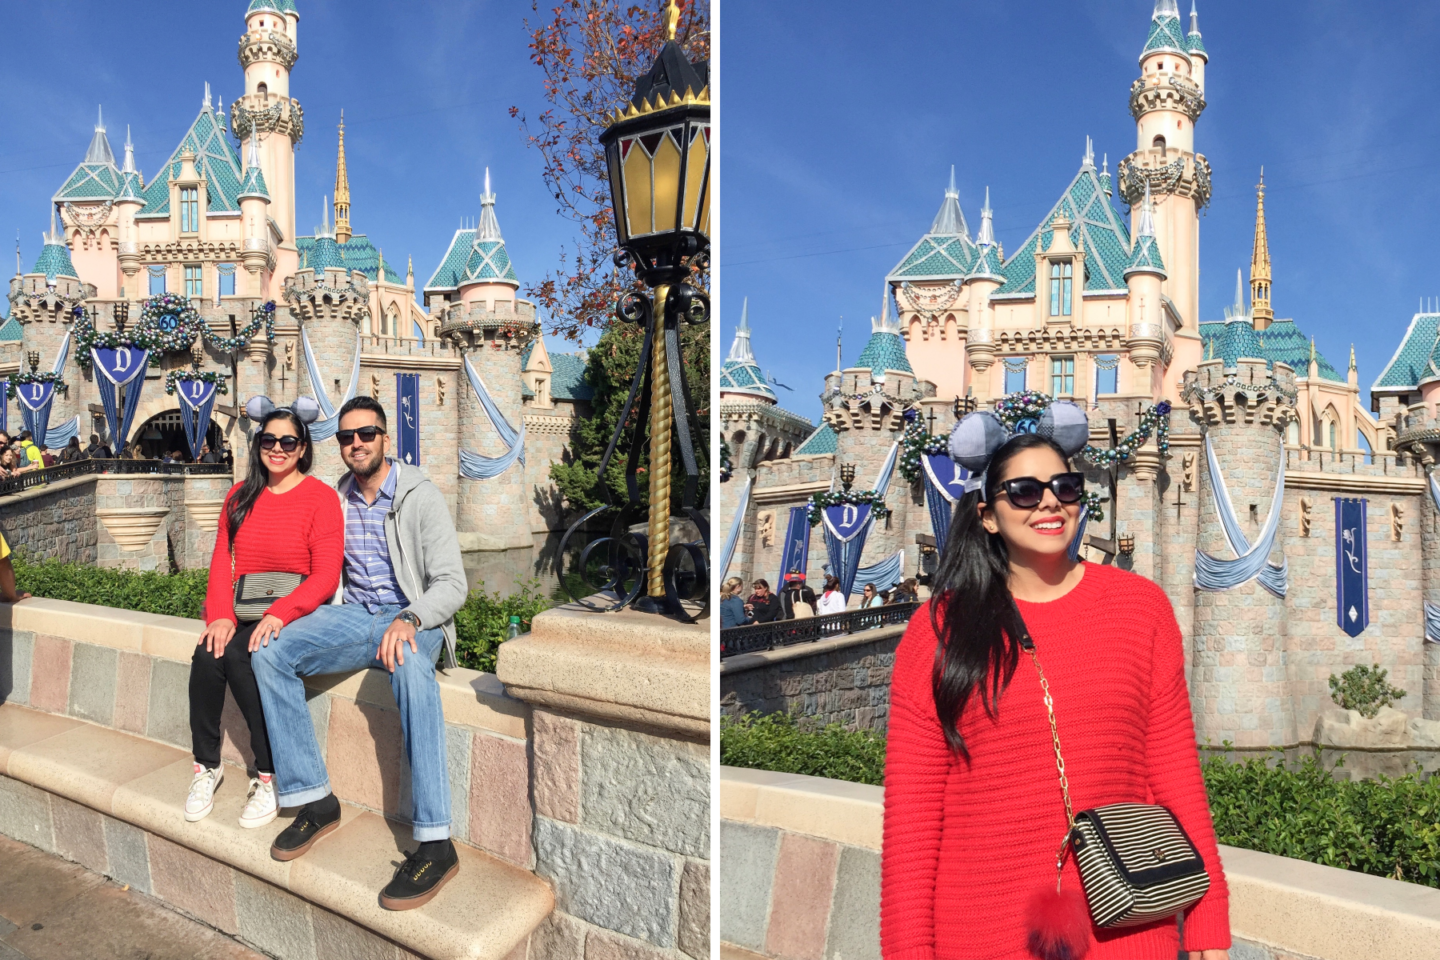 Couples pic in front of Disneyland castle